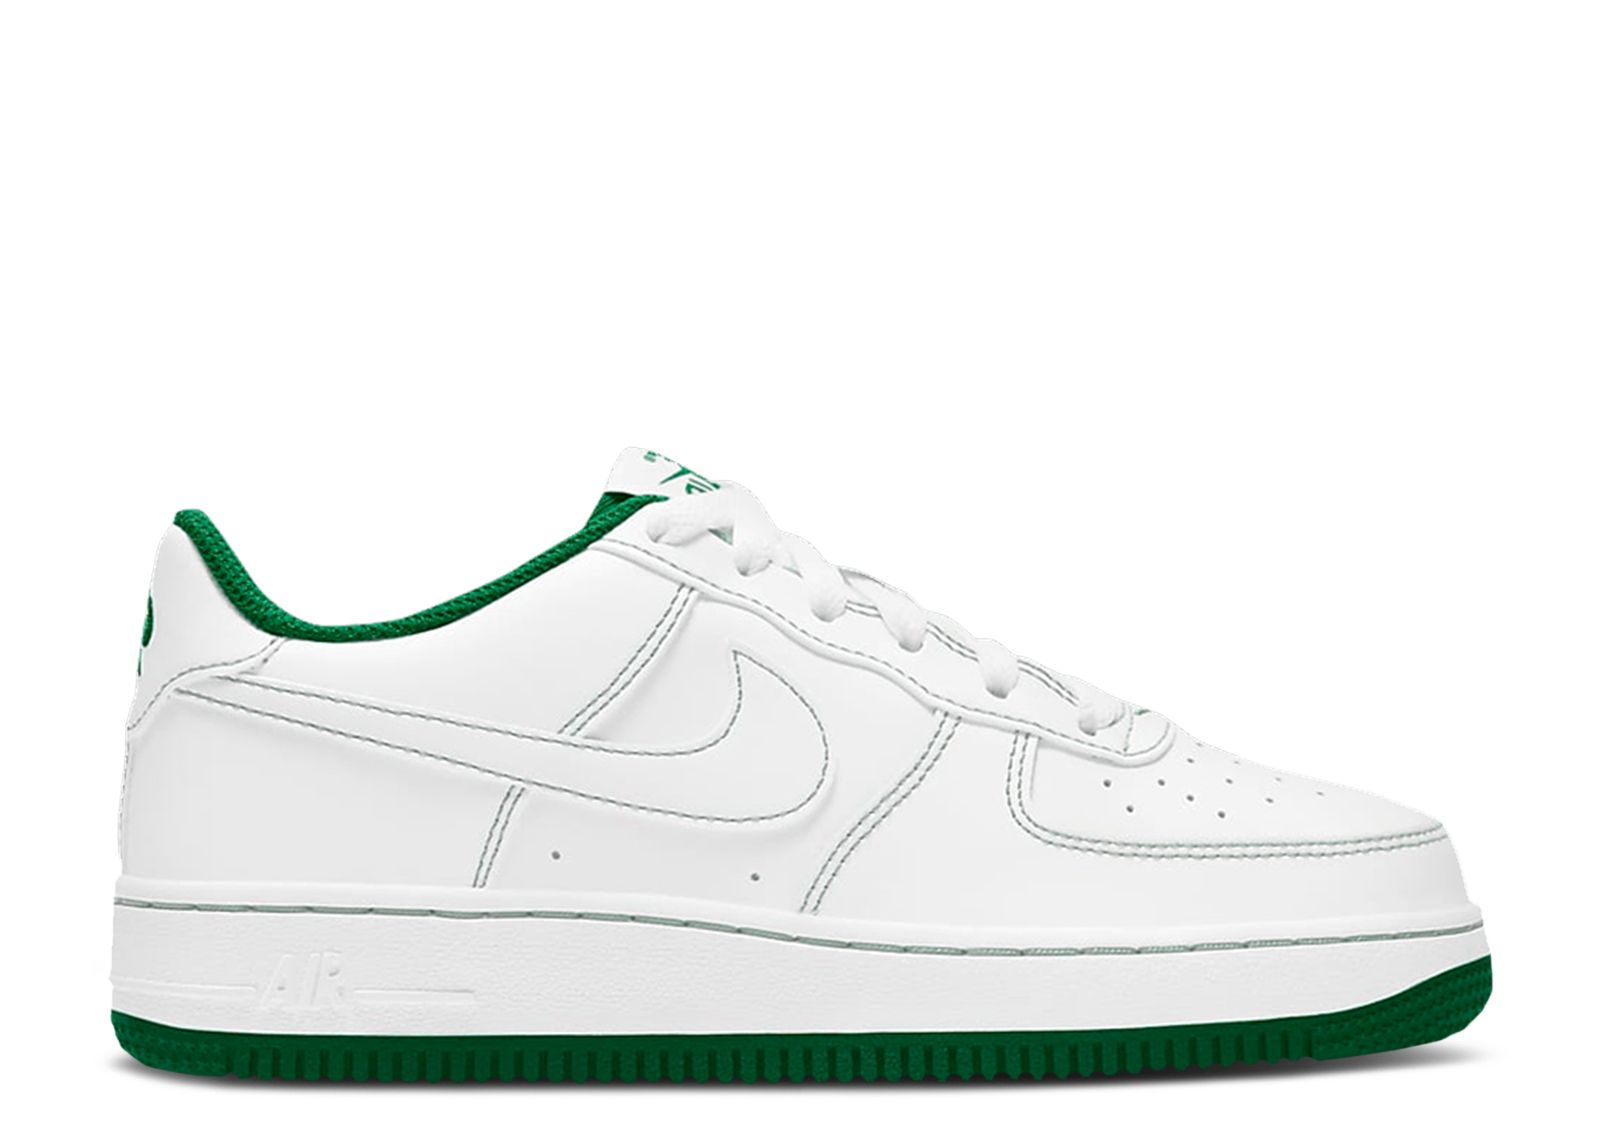 Second Chance - Nike Air Force 1 Low White Pine Green (GS) - 37,5